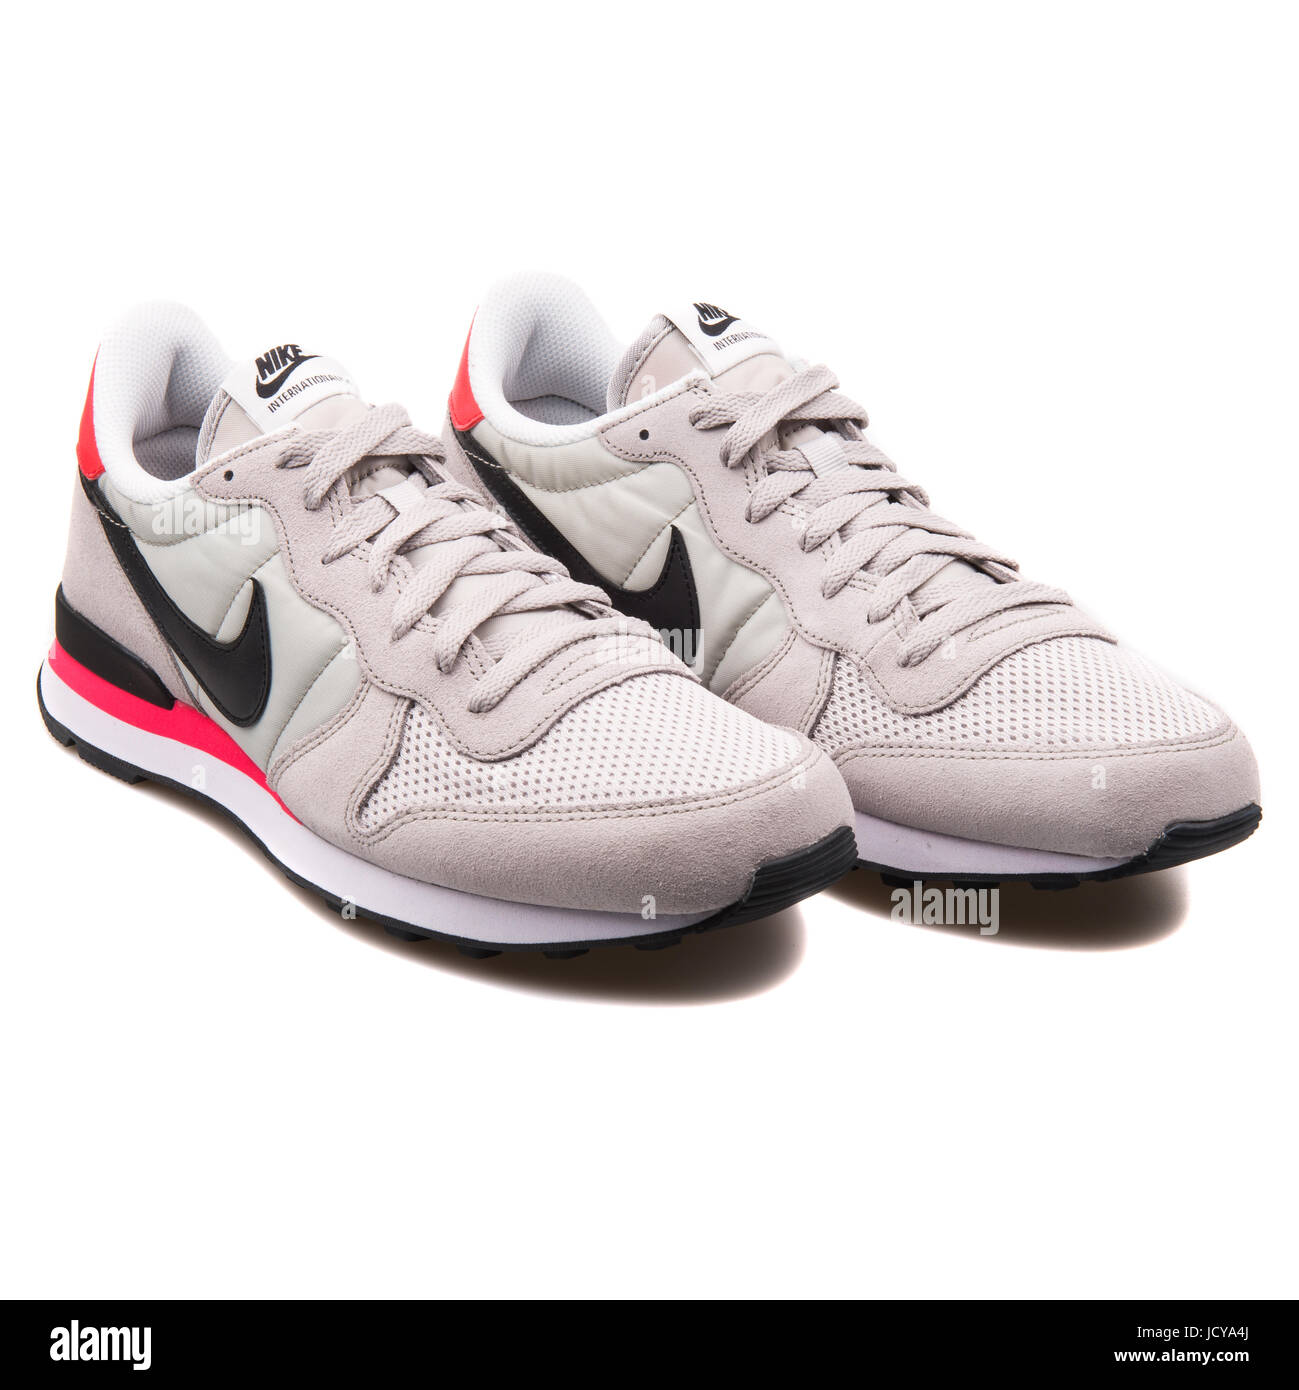 Nike Internationalist Neutral Grey, Black and infra Red Men's Shoes - 631754-006 Stock Photo - Alamy